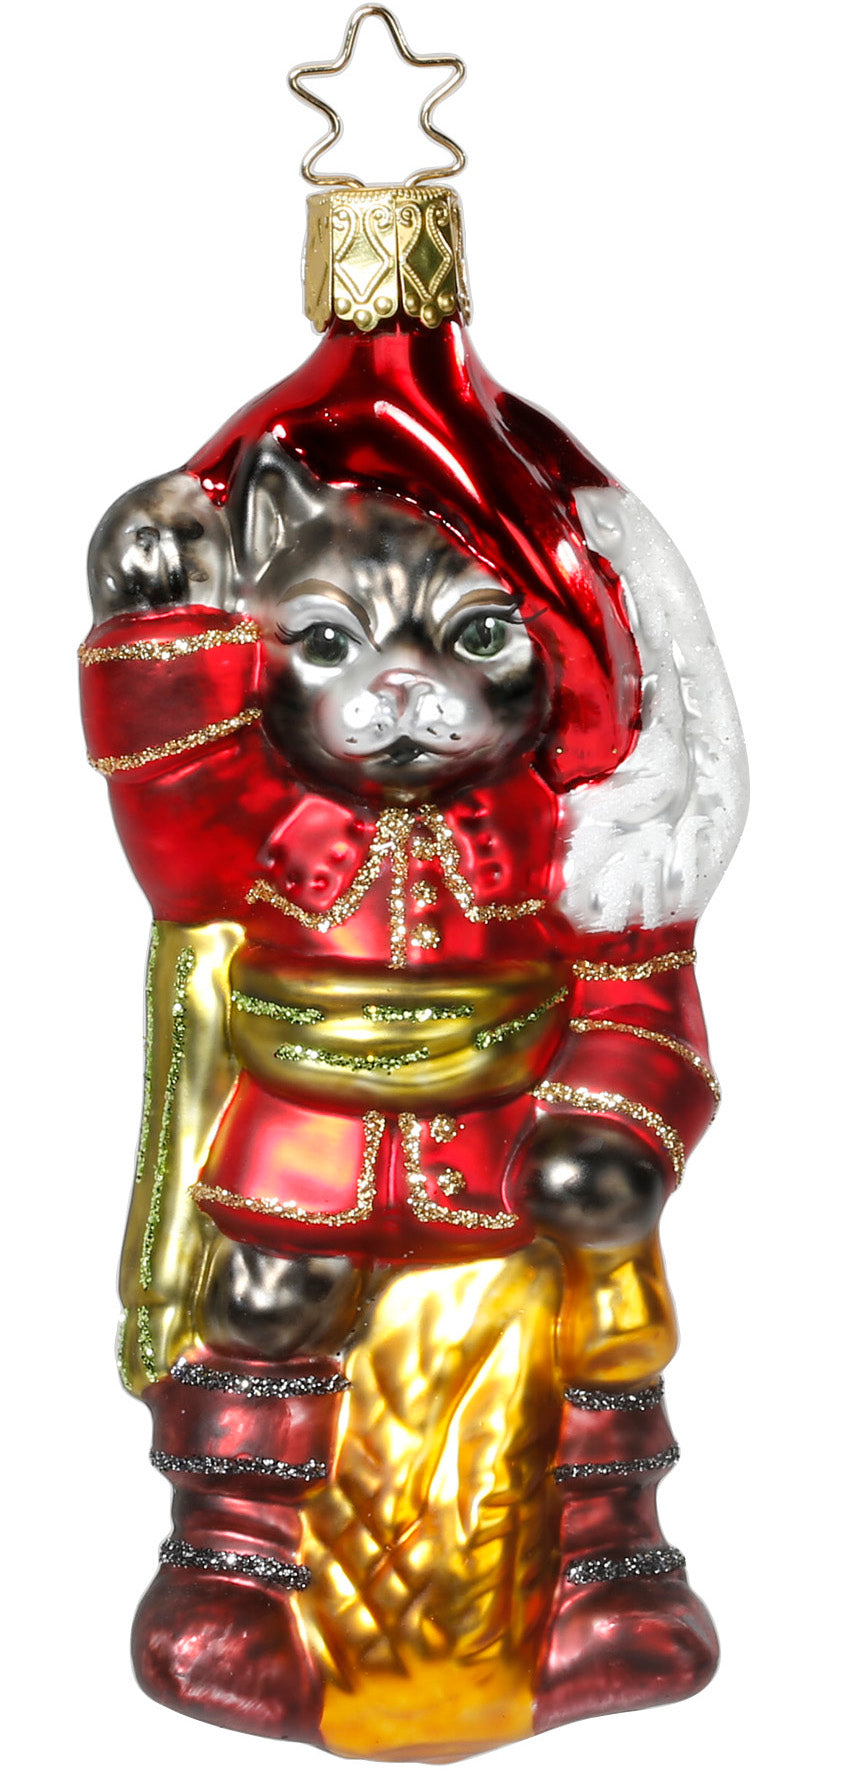 Puss'n' Boots Ornament